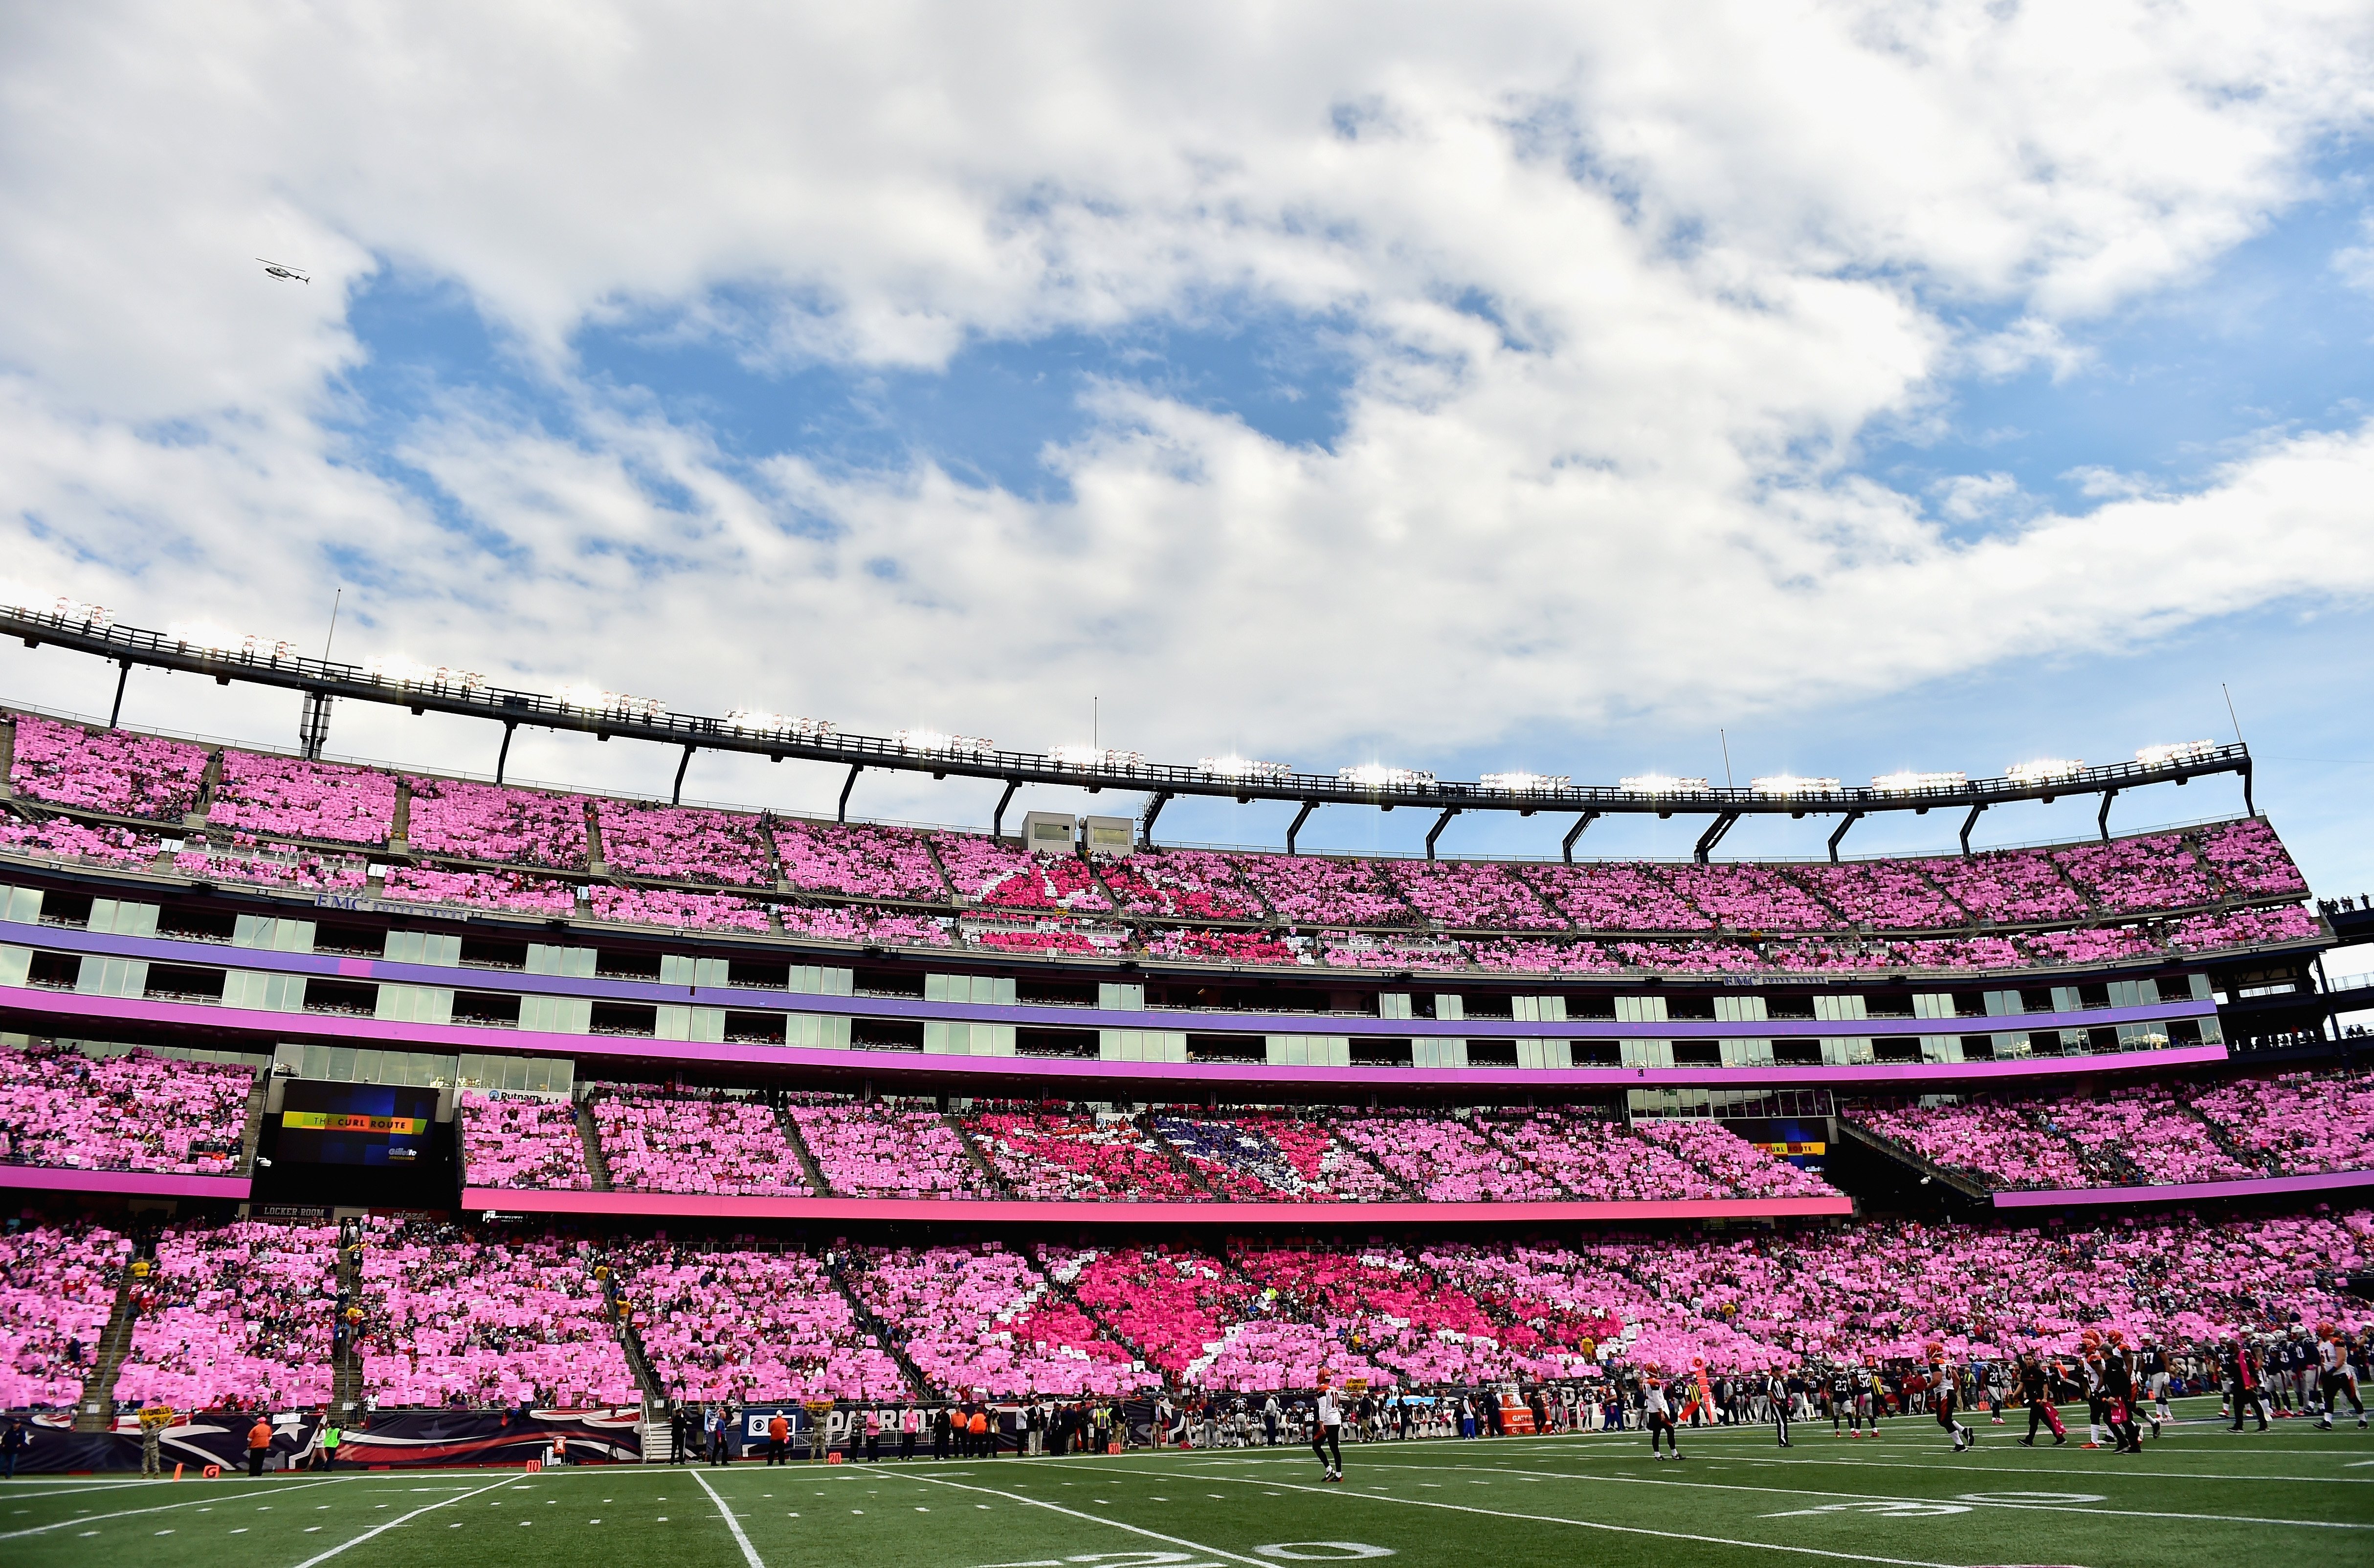 Fans participate in a card stunt for breast cancer awareness during a NFL match. | Source: Getty Images